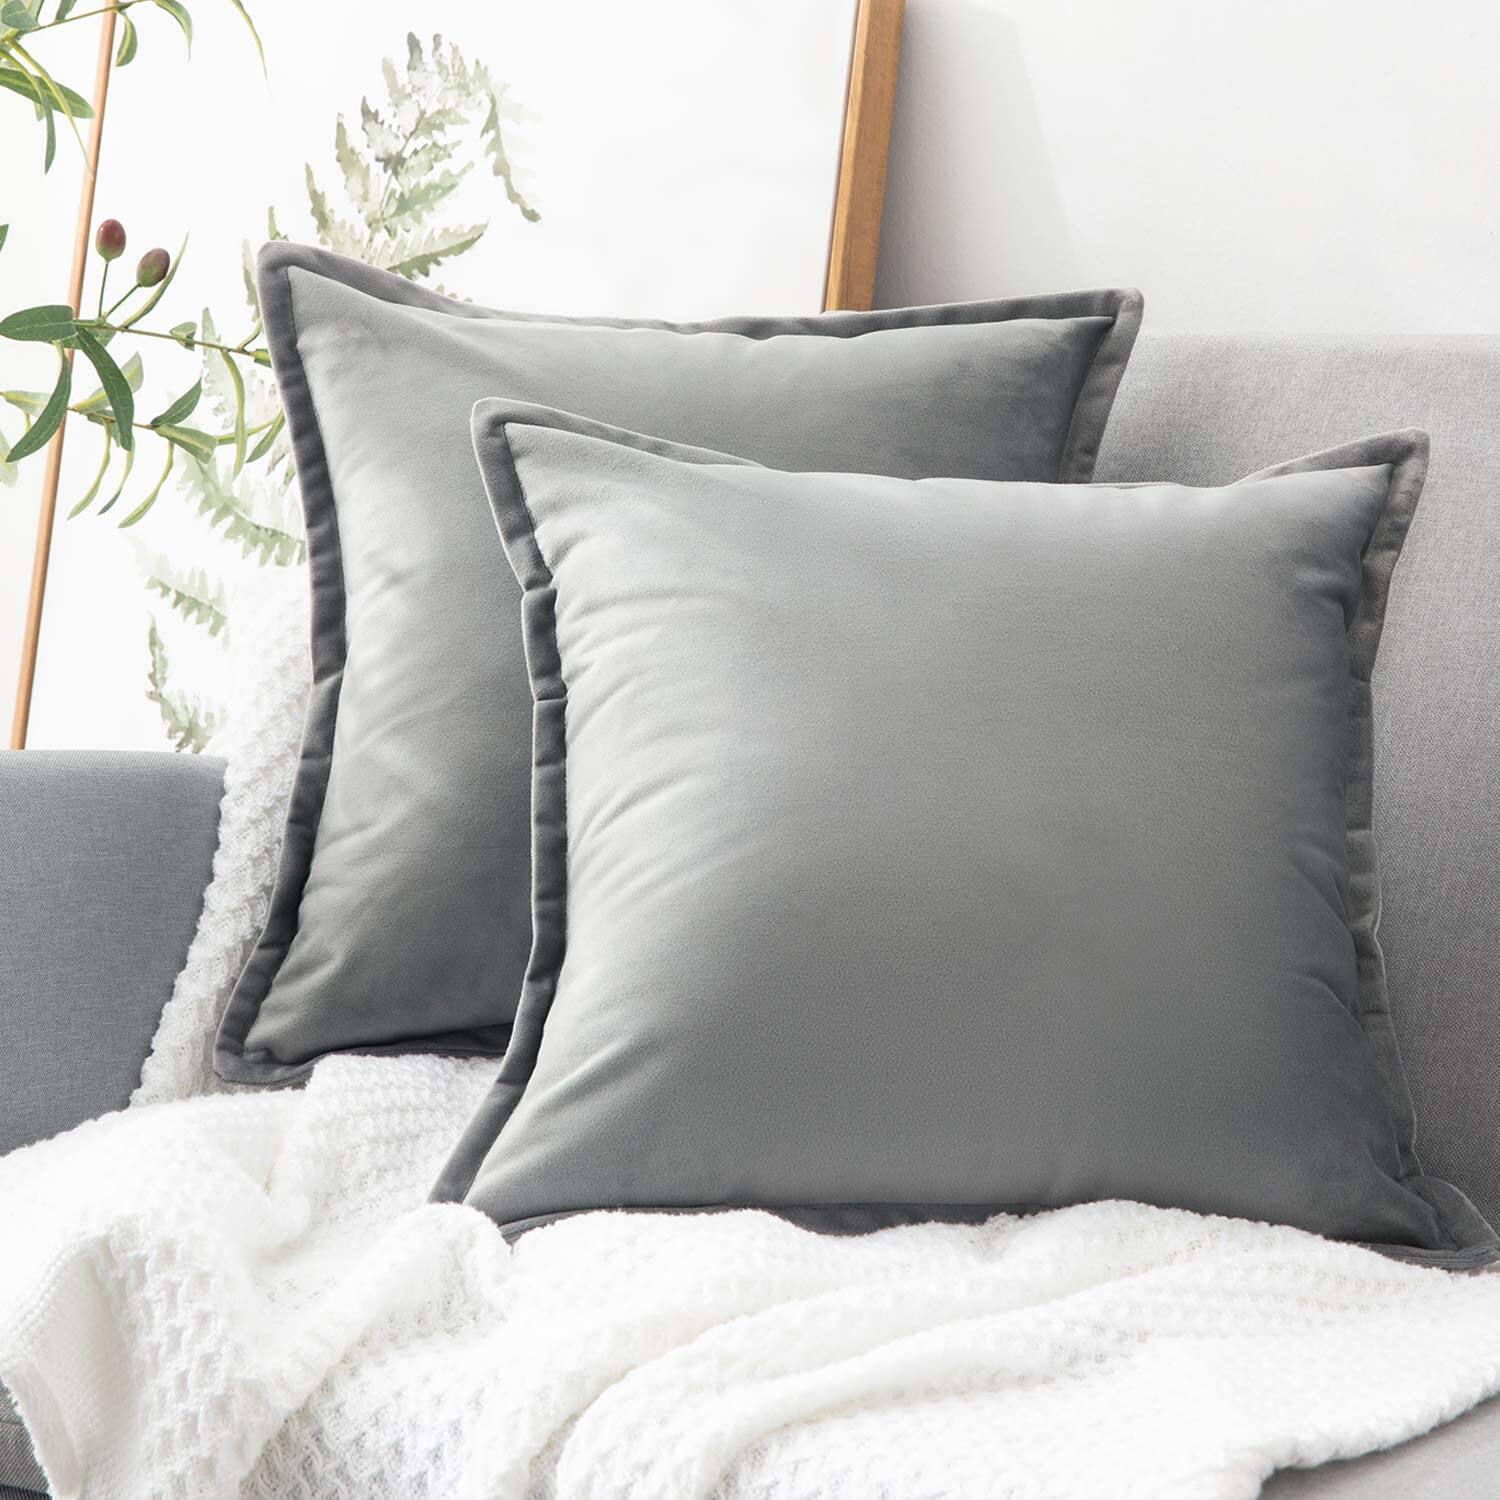 Bedsure Velvet Decorative Pillow Covers Cushion Case $5.19~$6.79 + Free Shipping with Prime